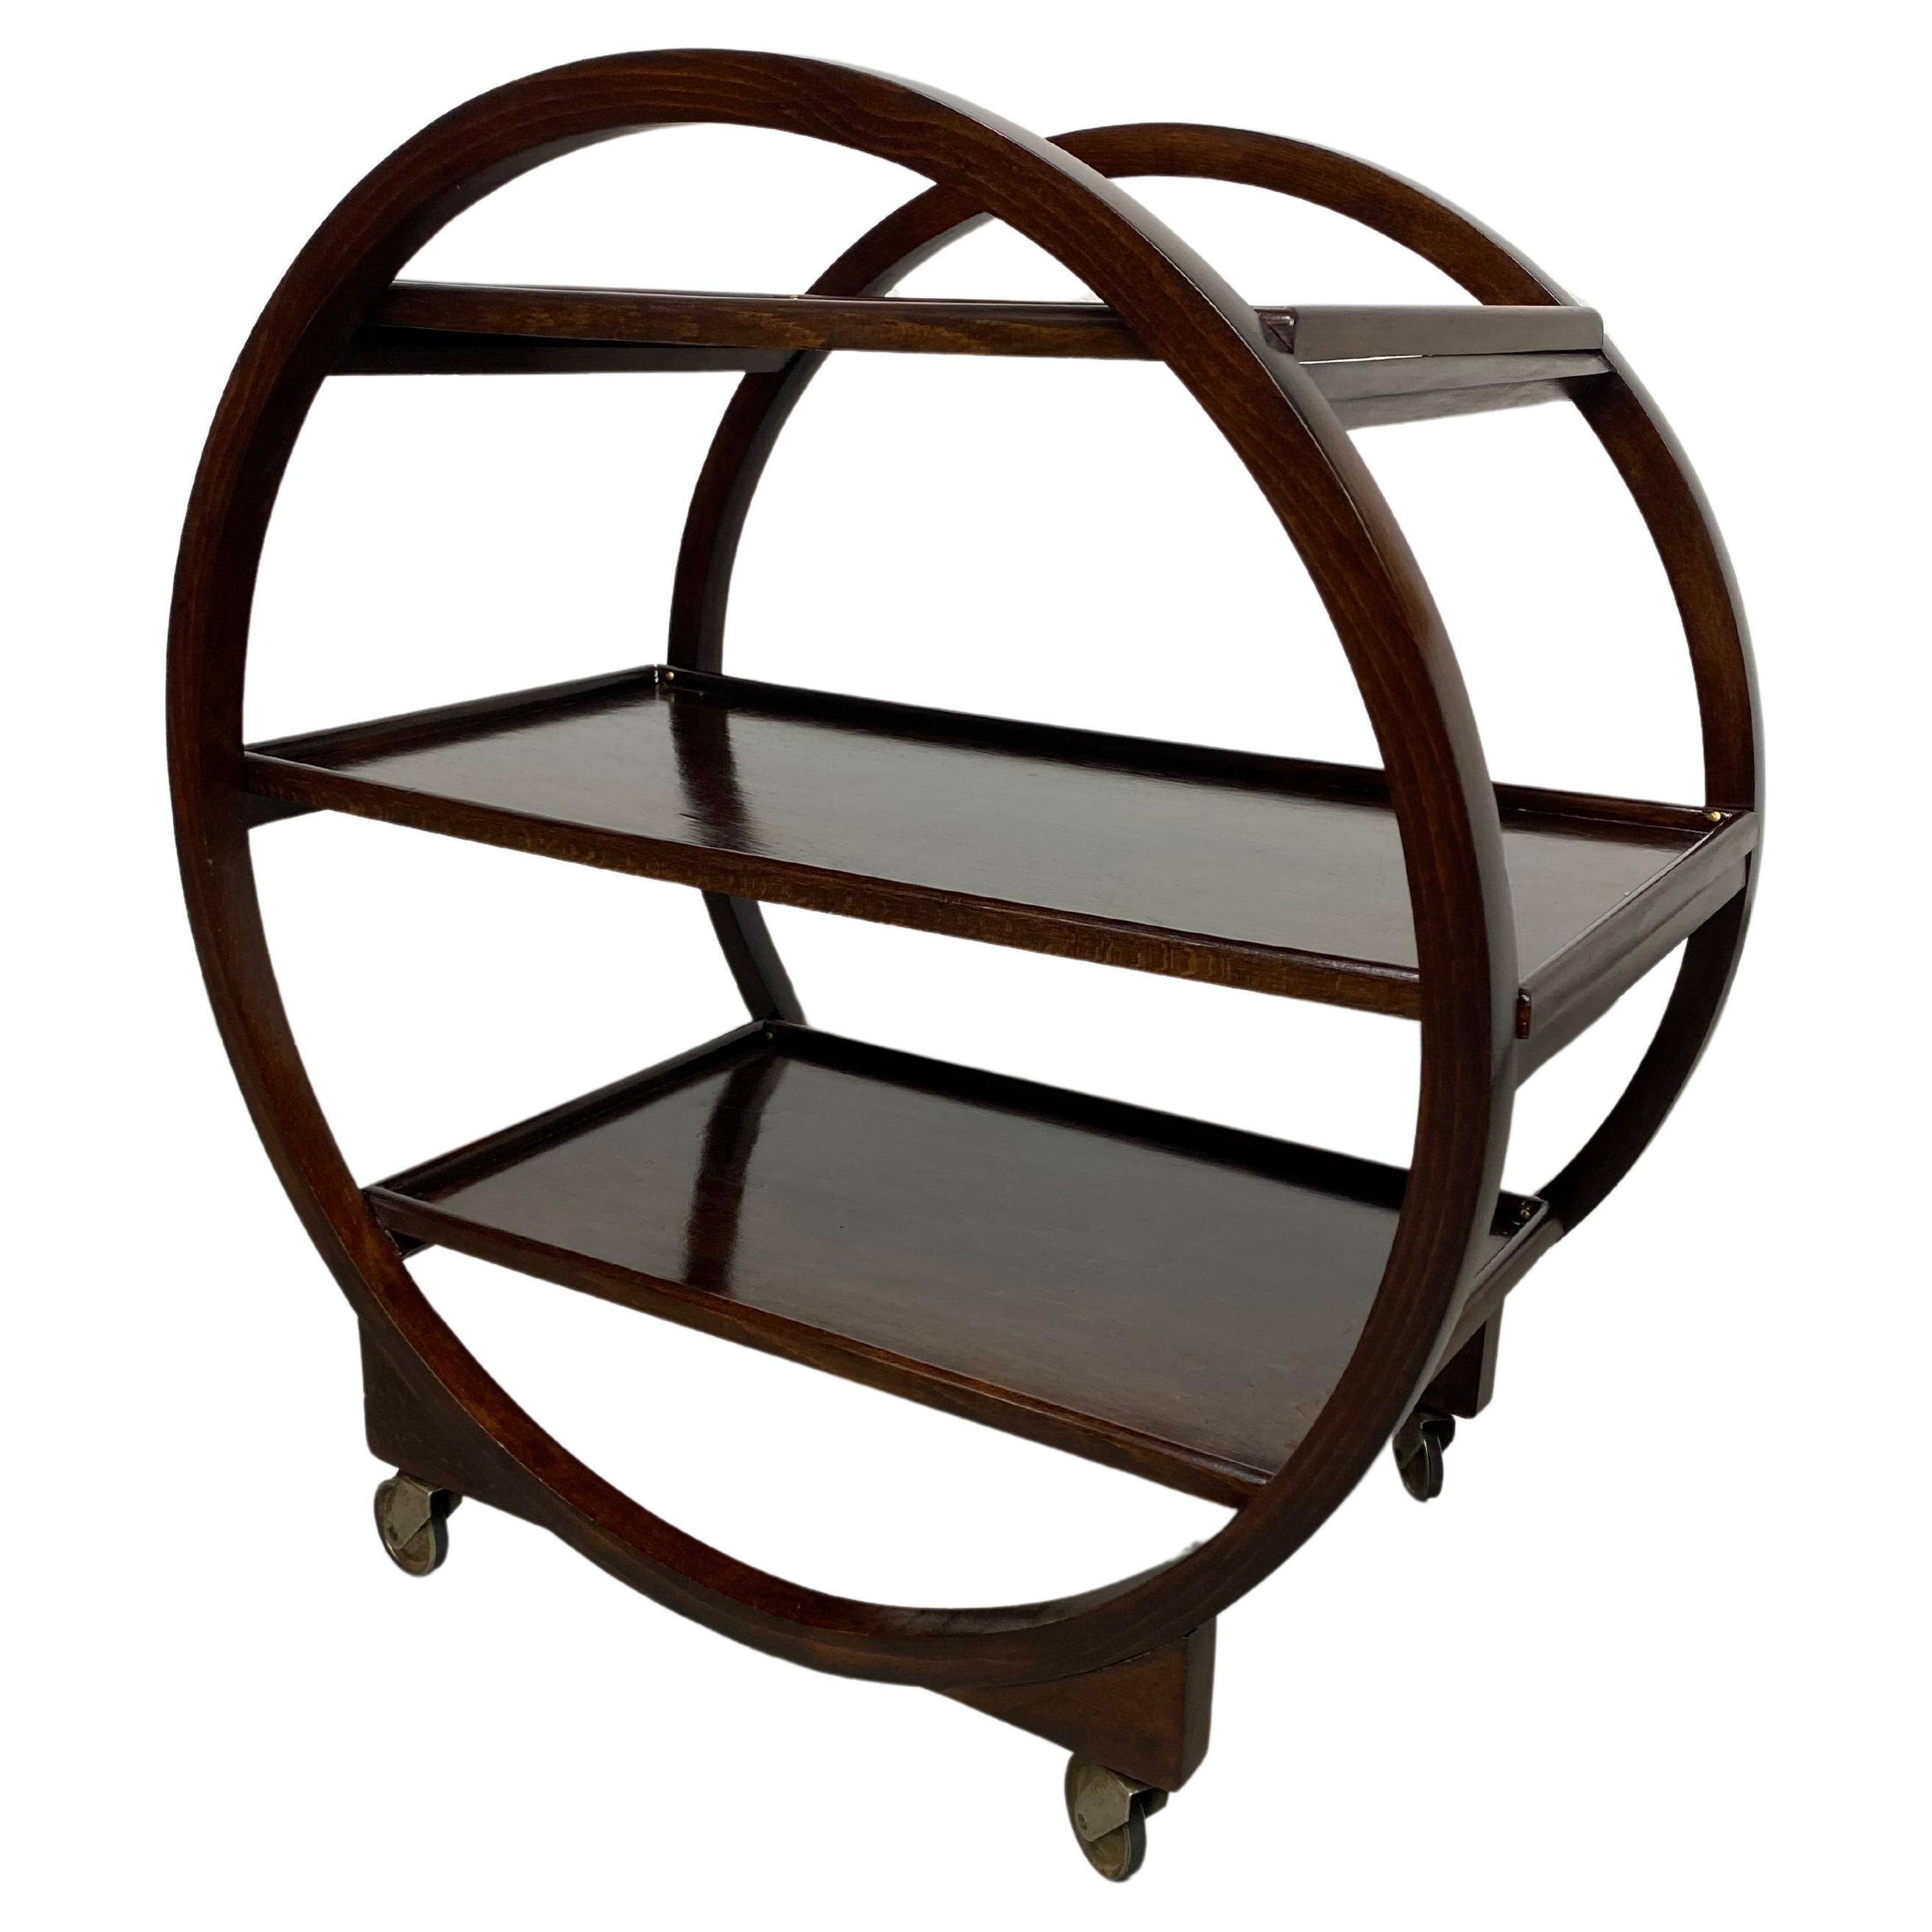 Art deco serving trolley by Thonet Mundus 1930s For Sale